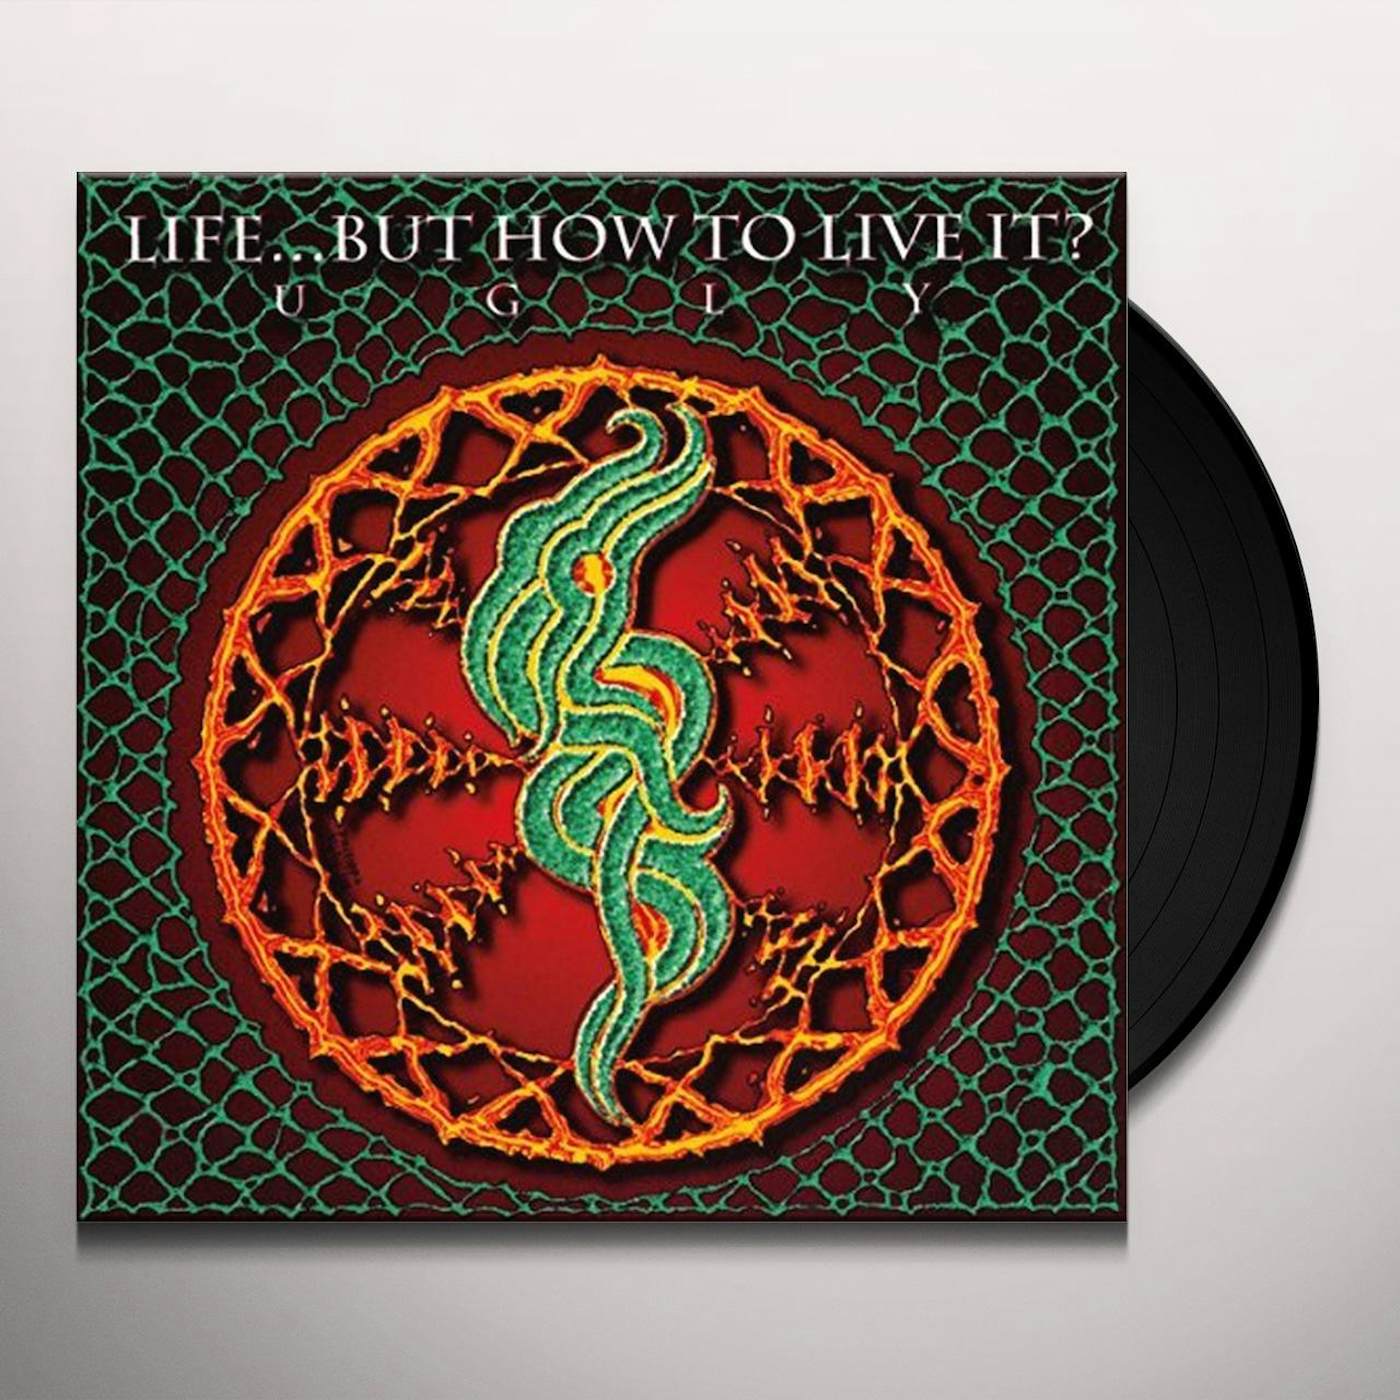 Life... But How To Live It? Ugly Vinyl Record